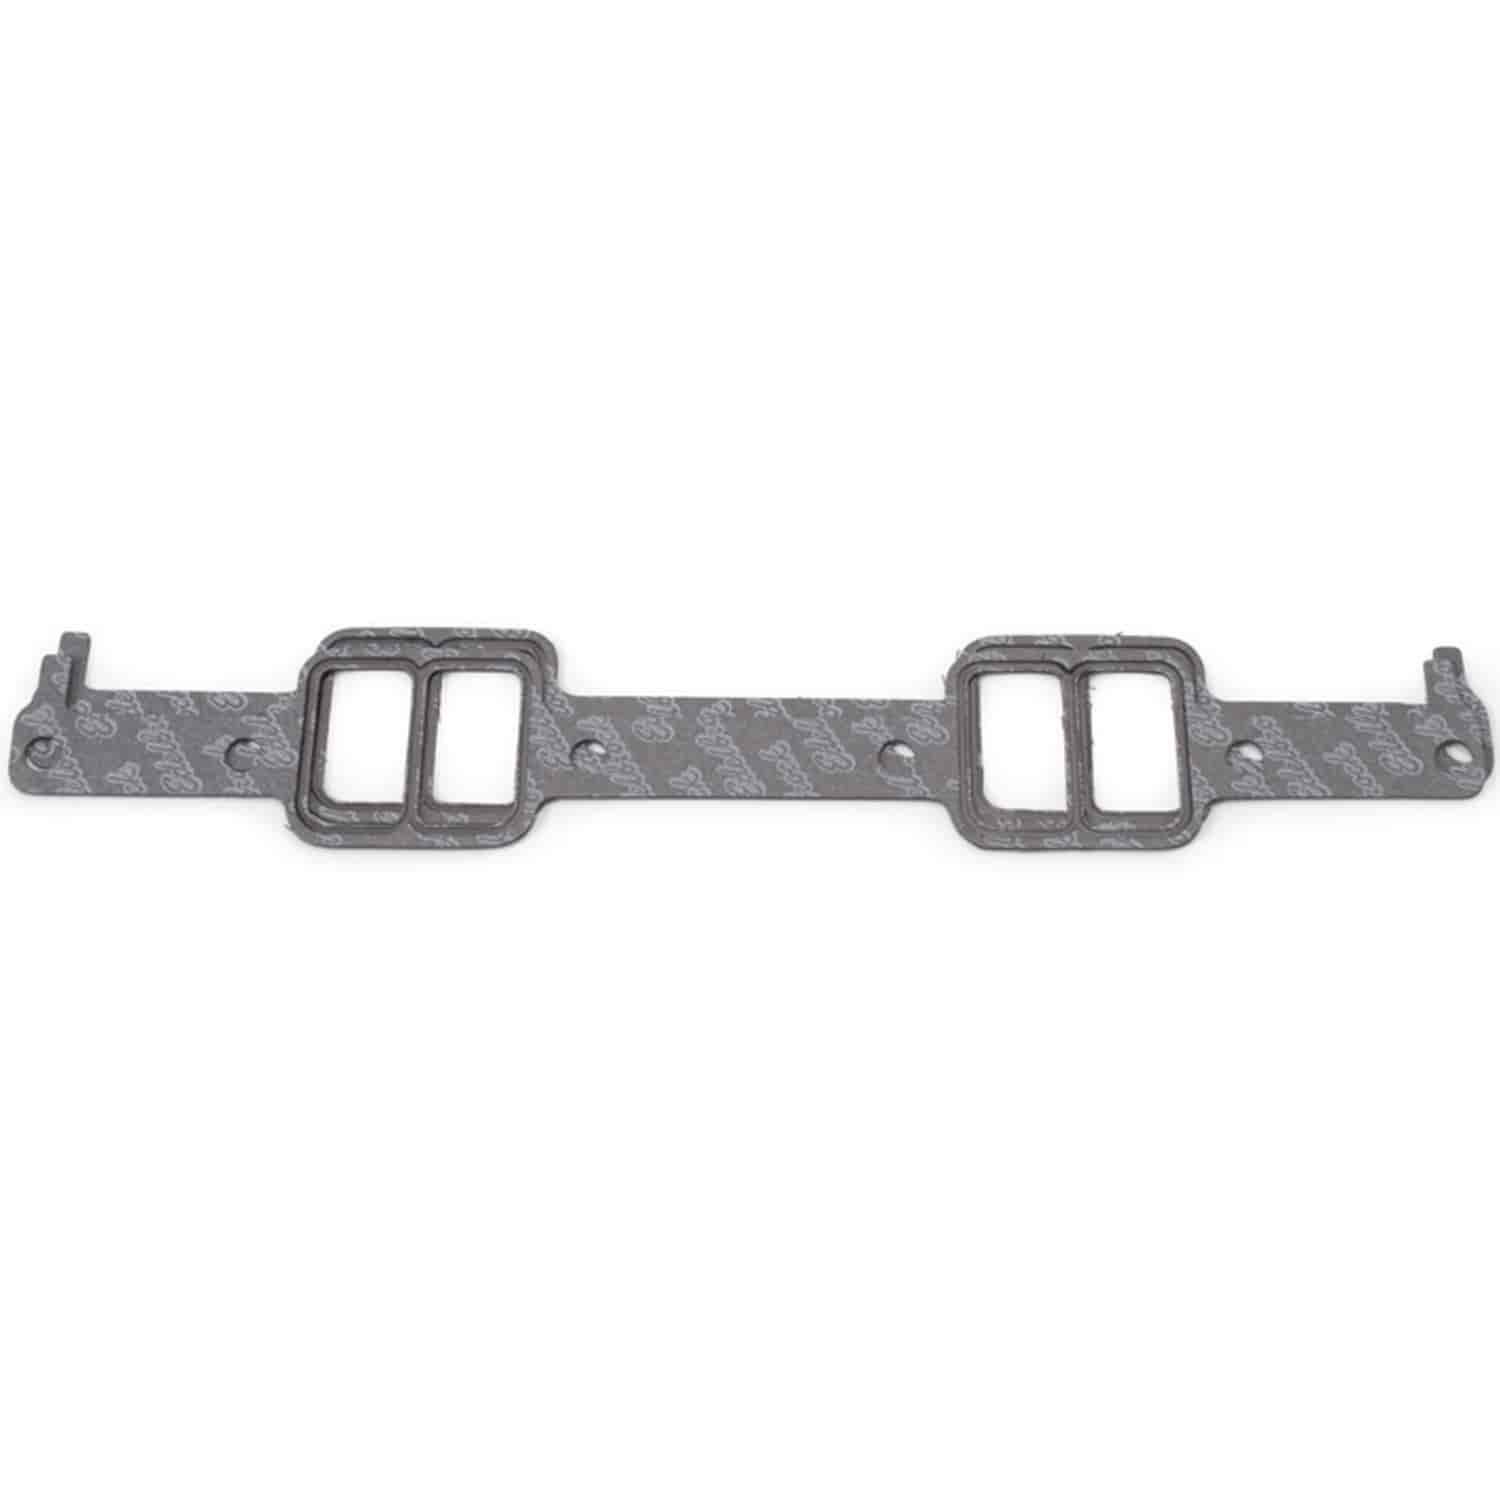 Intake Gaskets for 1992-97 Chevy LT4